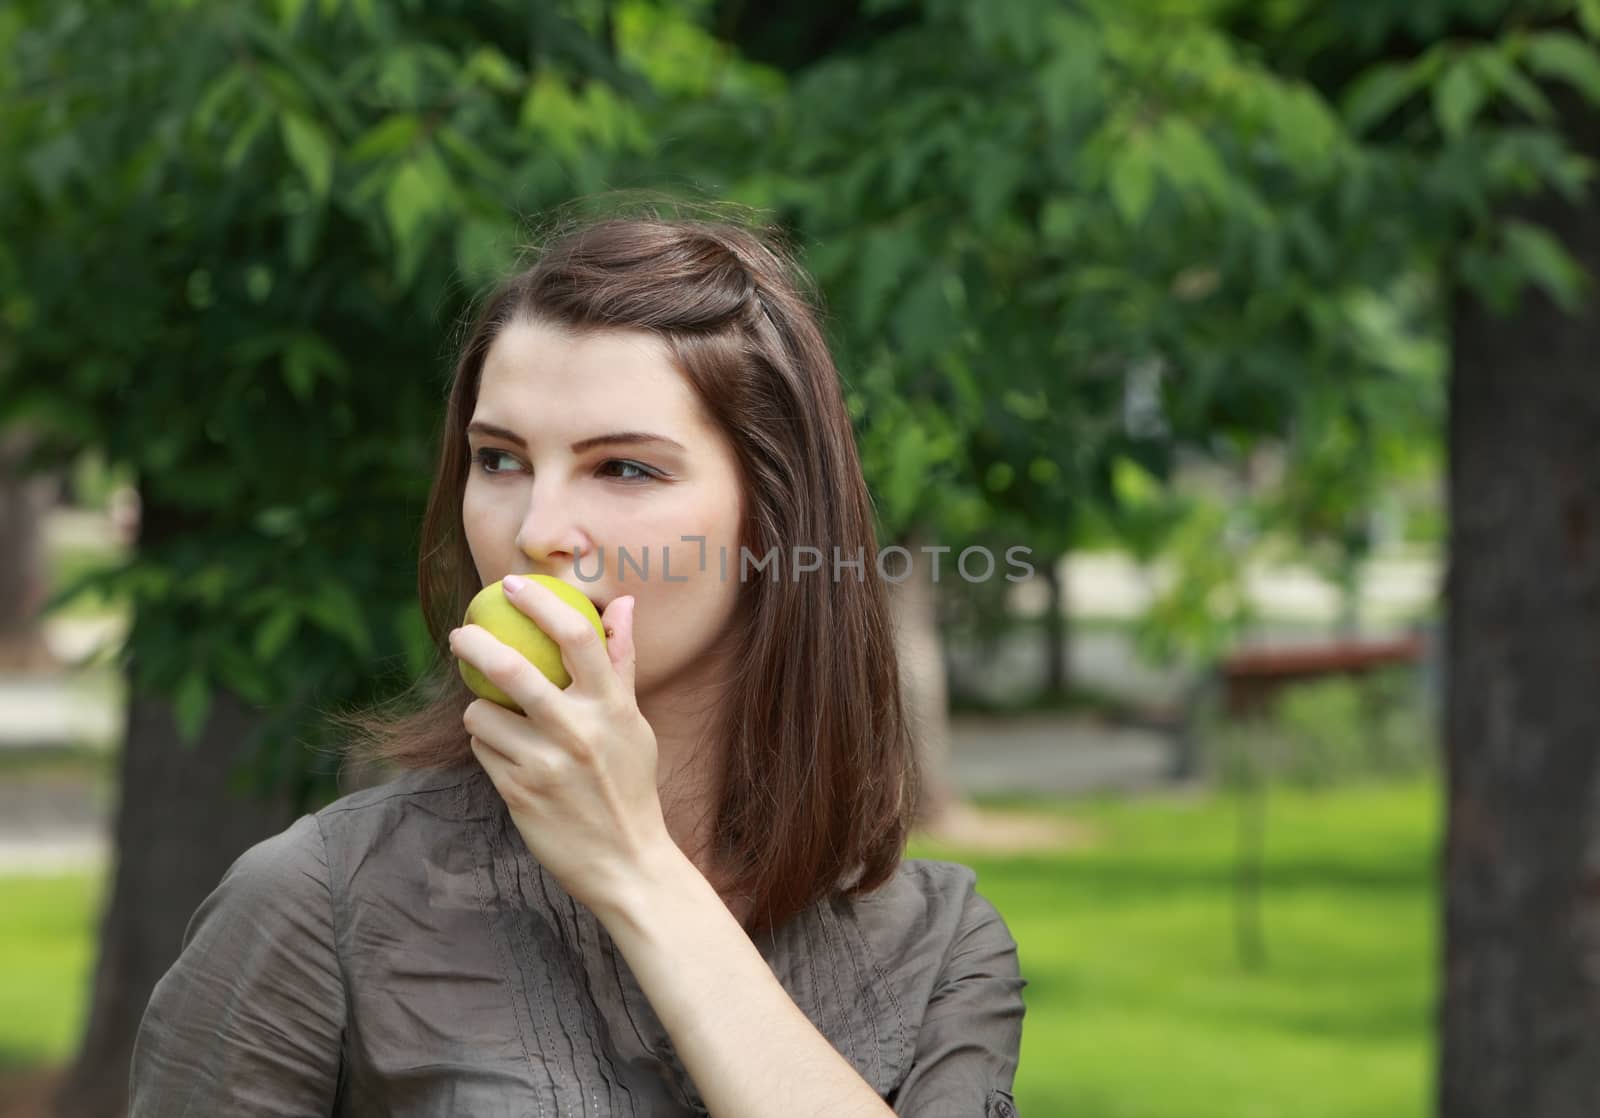 Portrait of a young woman biting in a fresh green apple outdoor in a park.